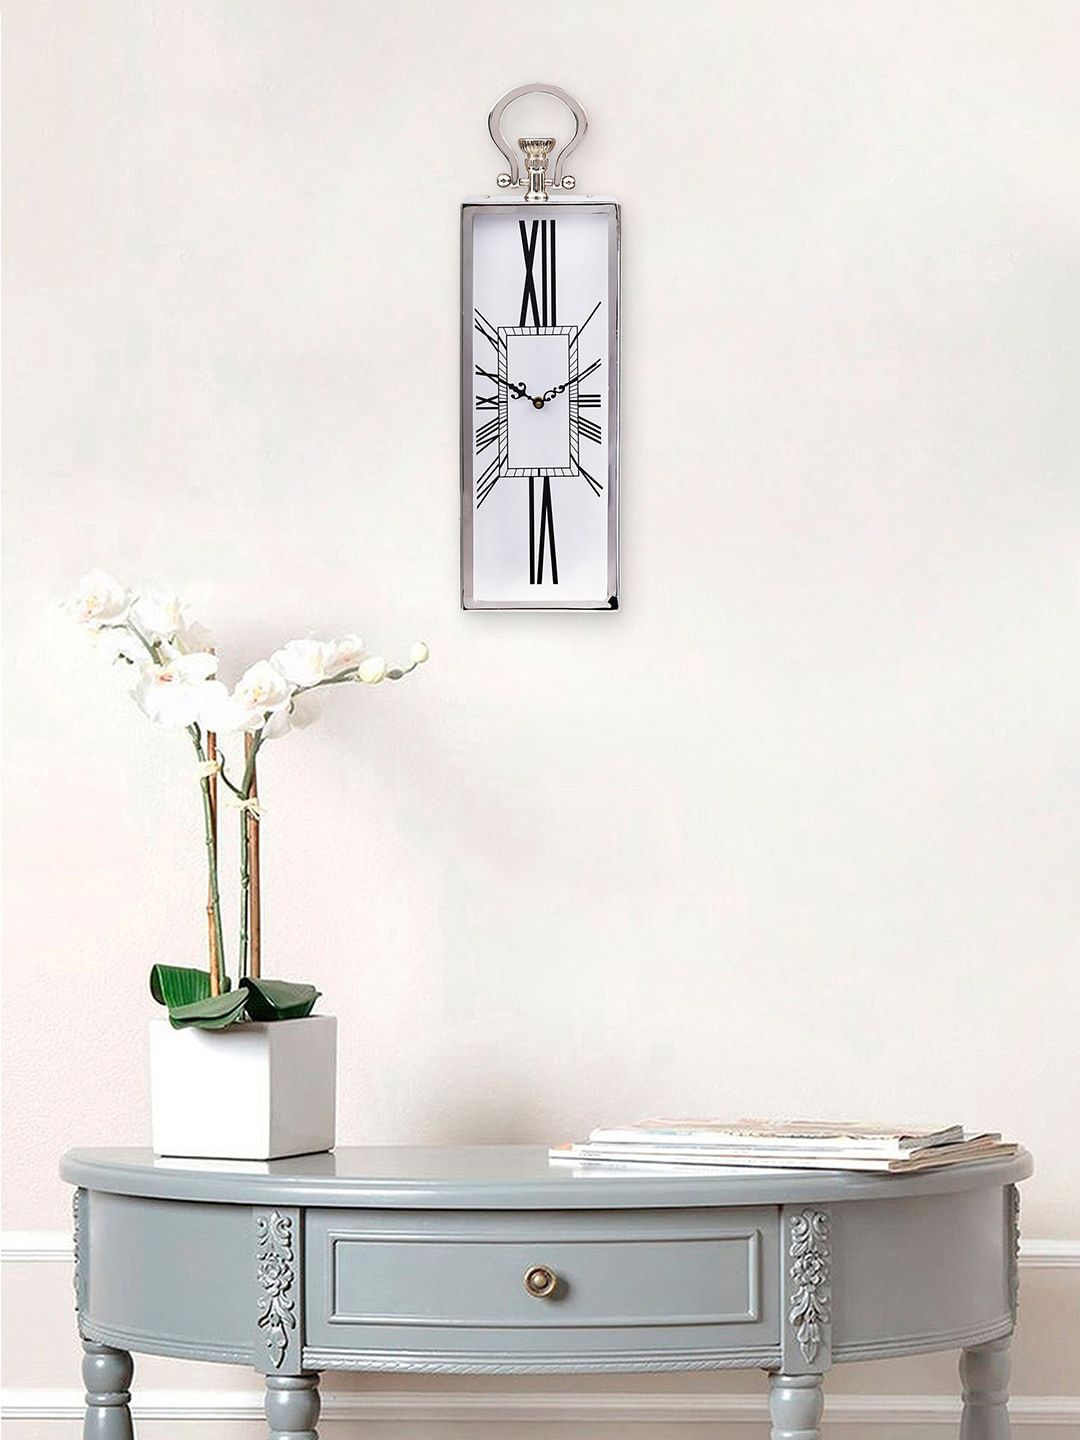 eCraftIndia Silver-Toned & White Vintage Wall Clock Price in India